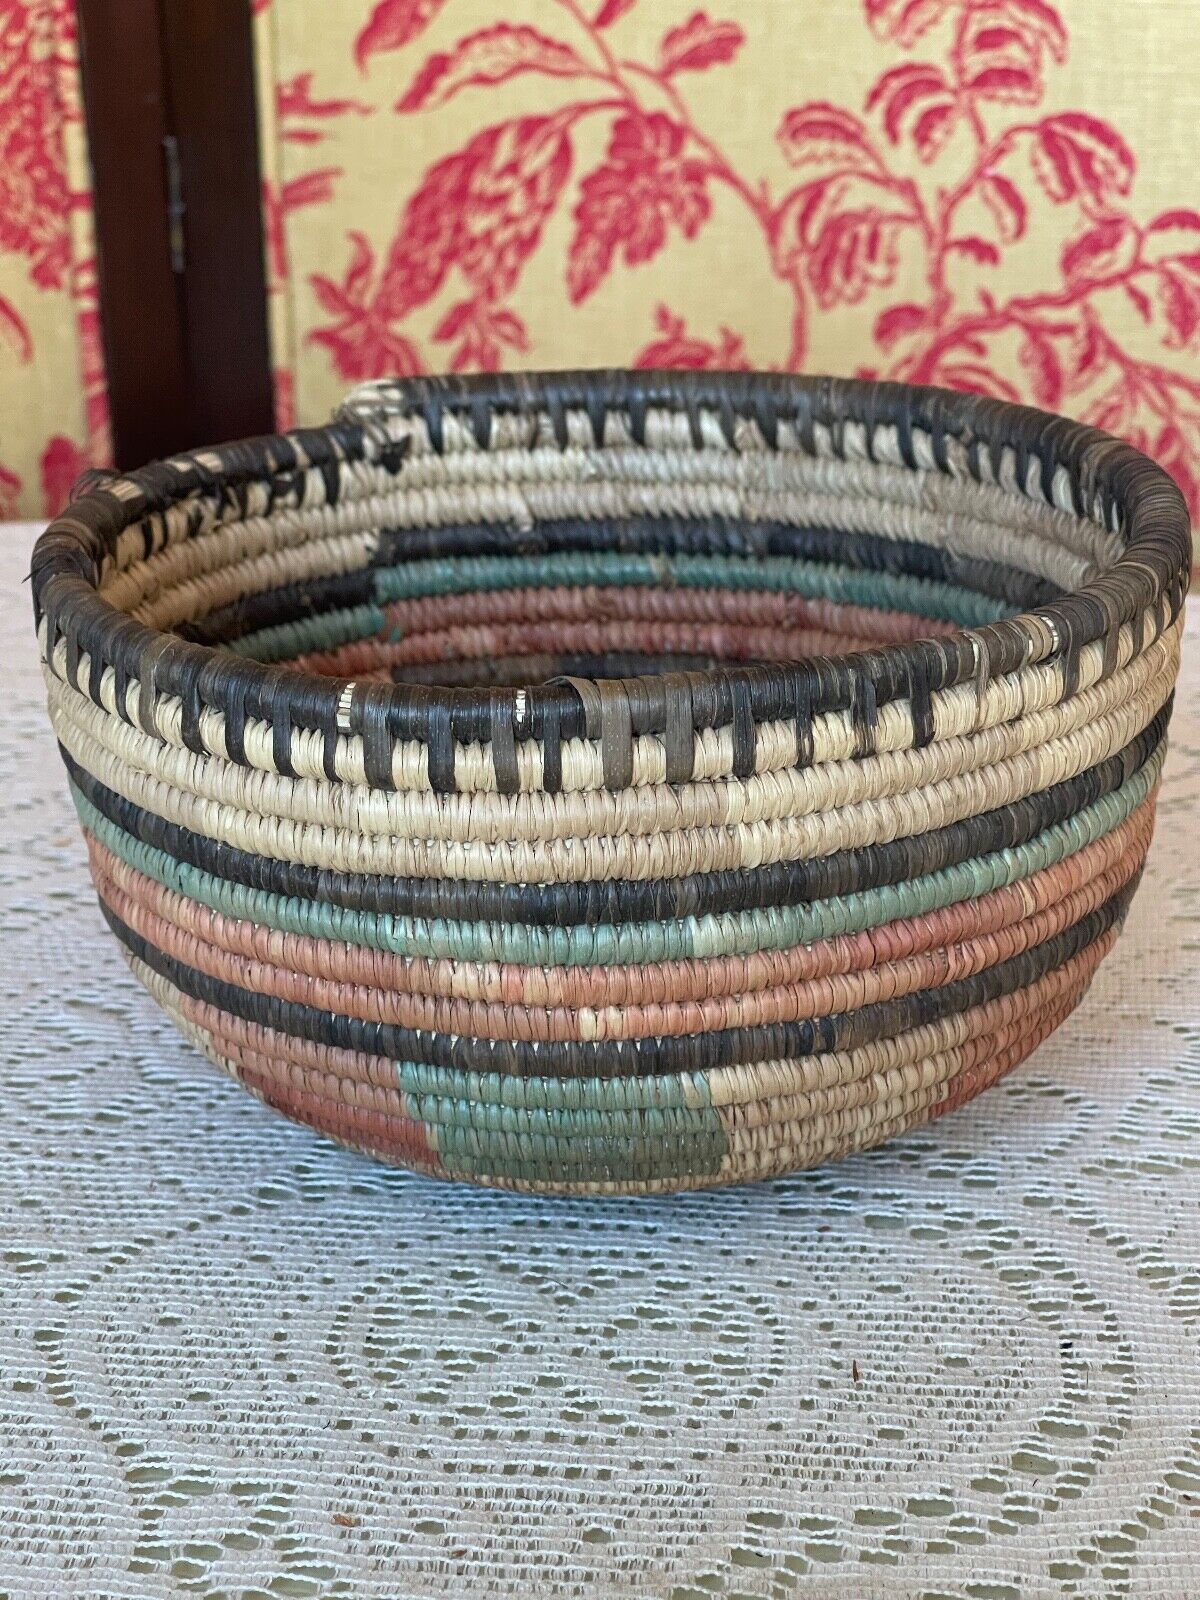 African Tribal Handwoven Coil Basket